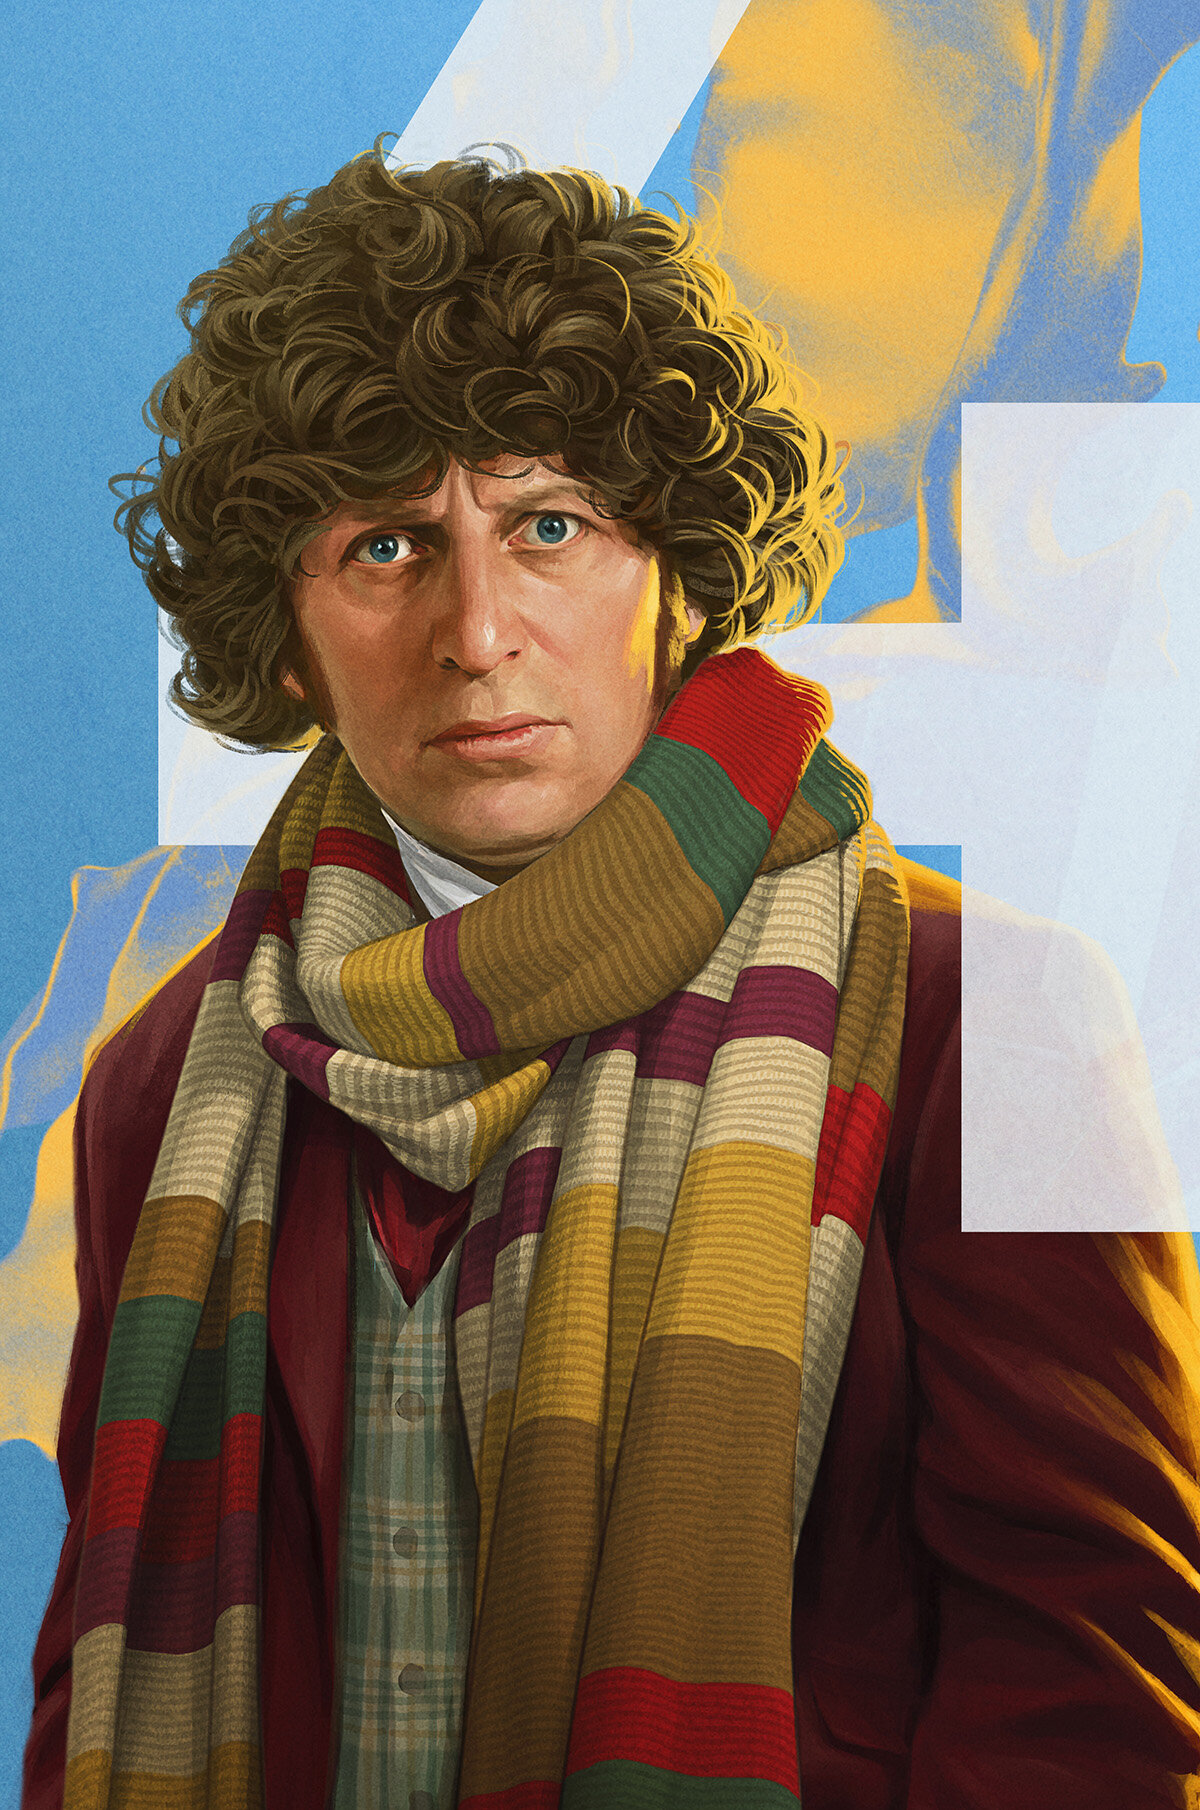 Dr_Who_TomBaker_RGB_FY_Test_04_1200px.jpg